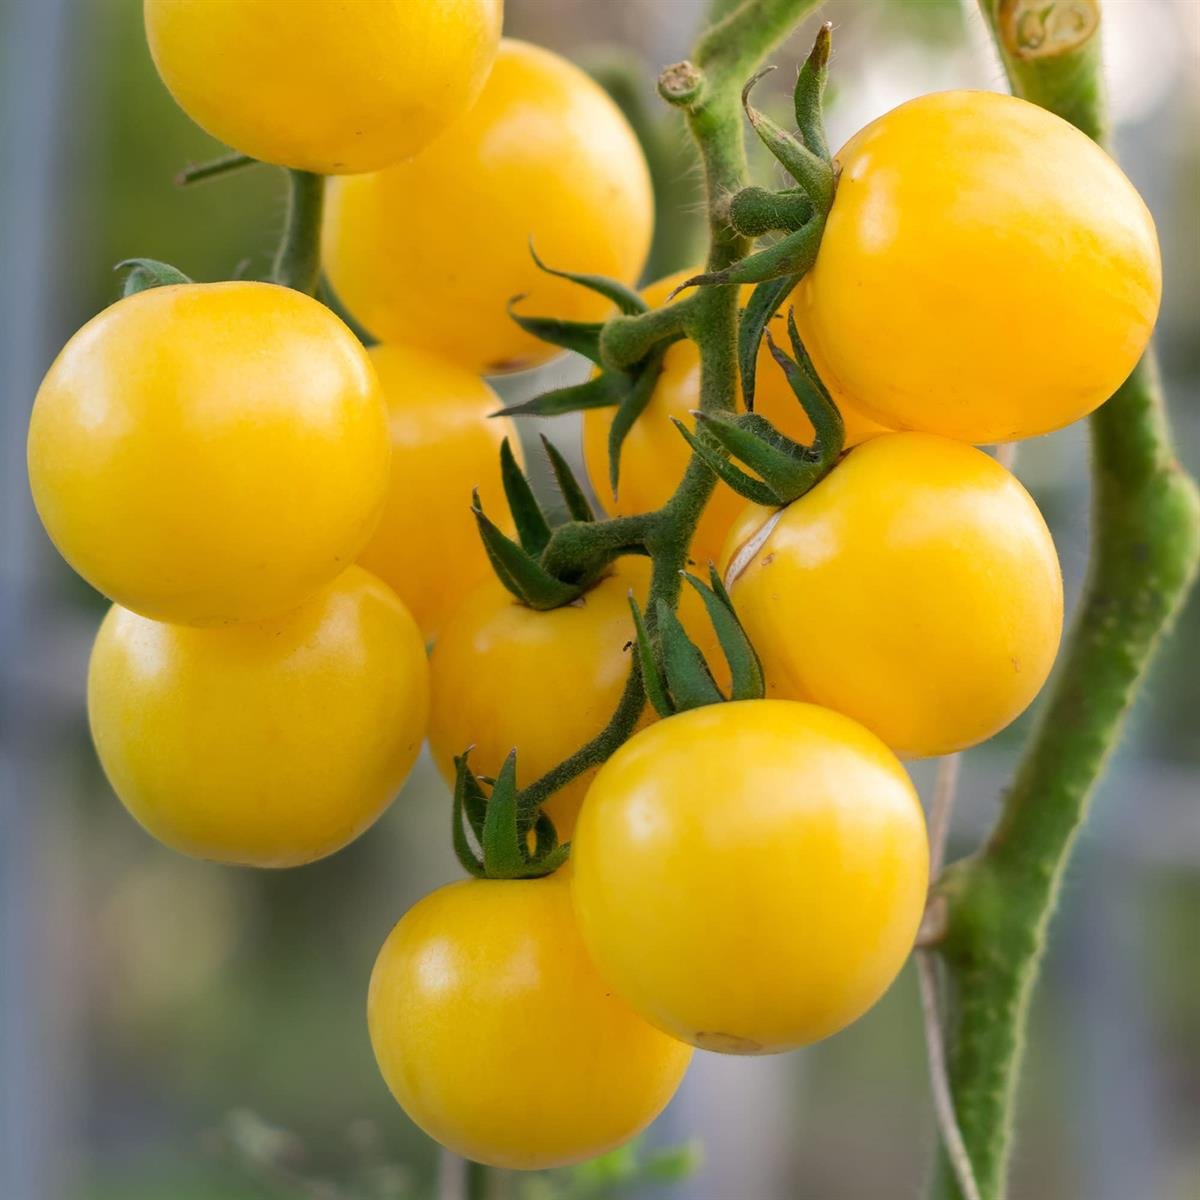 SKY SEEDS Indeterminate high production cherry tomato Tomato